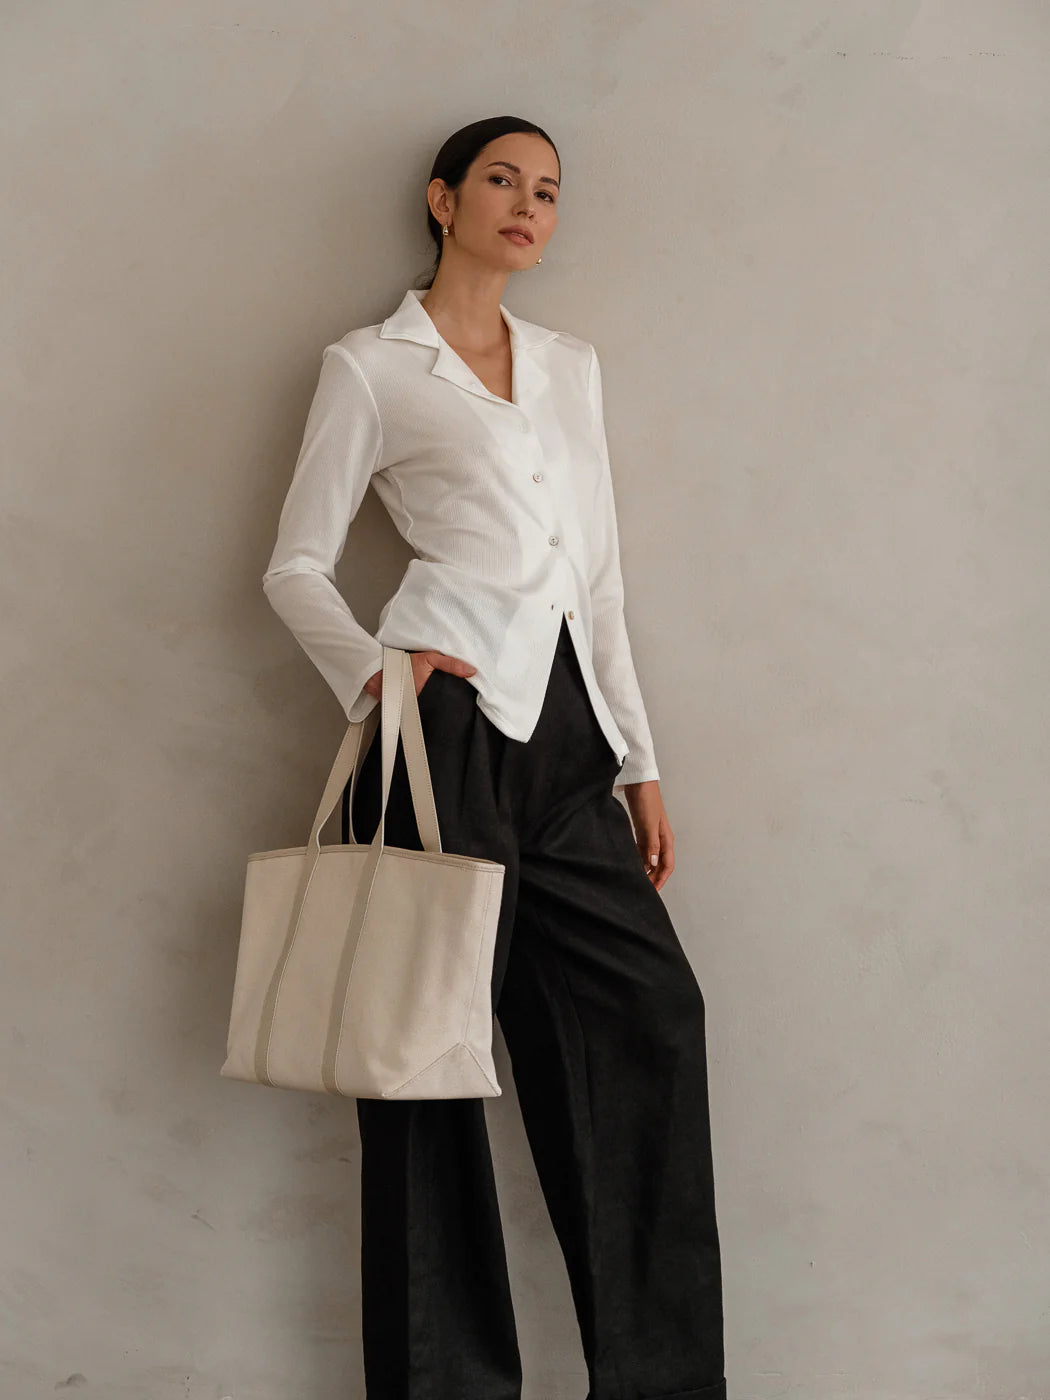 Structured Tote Bag